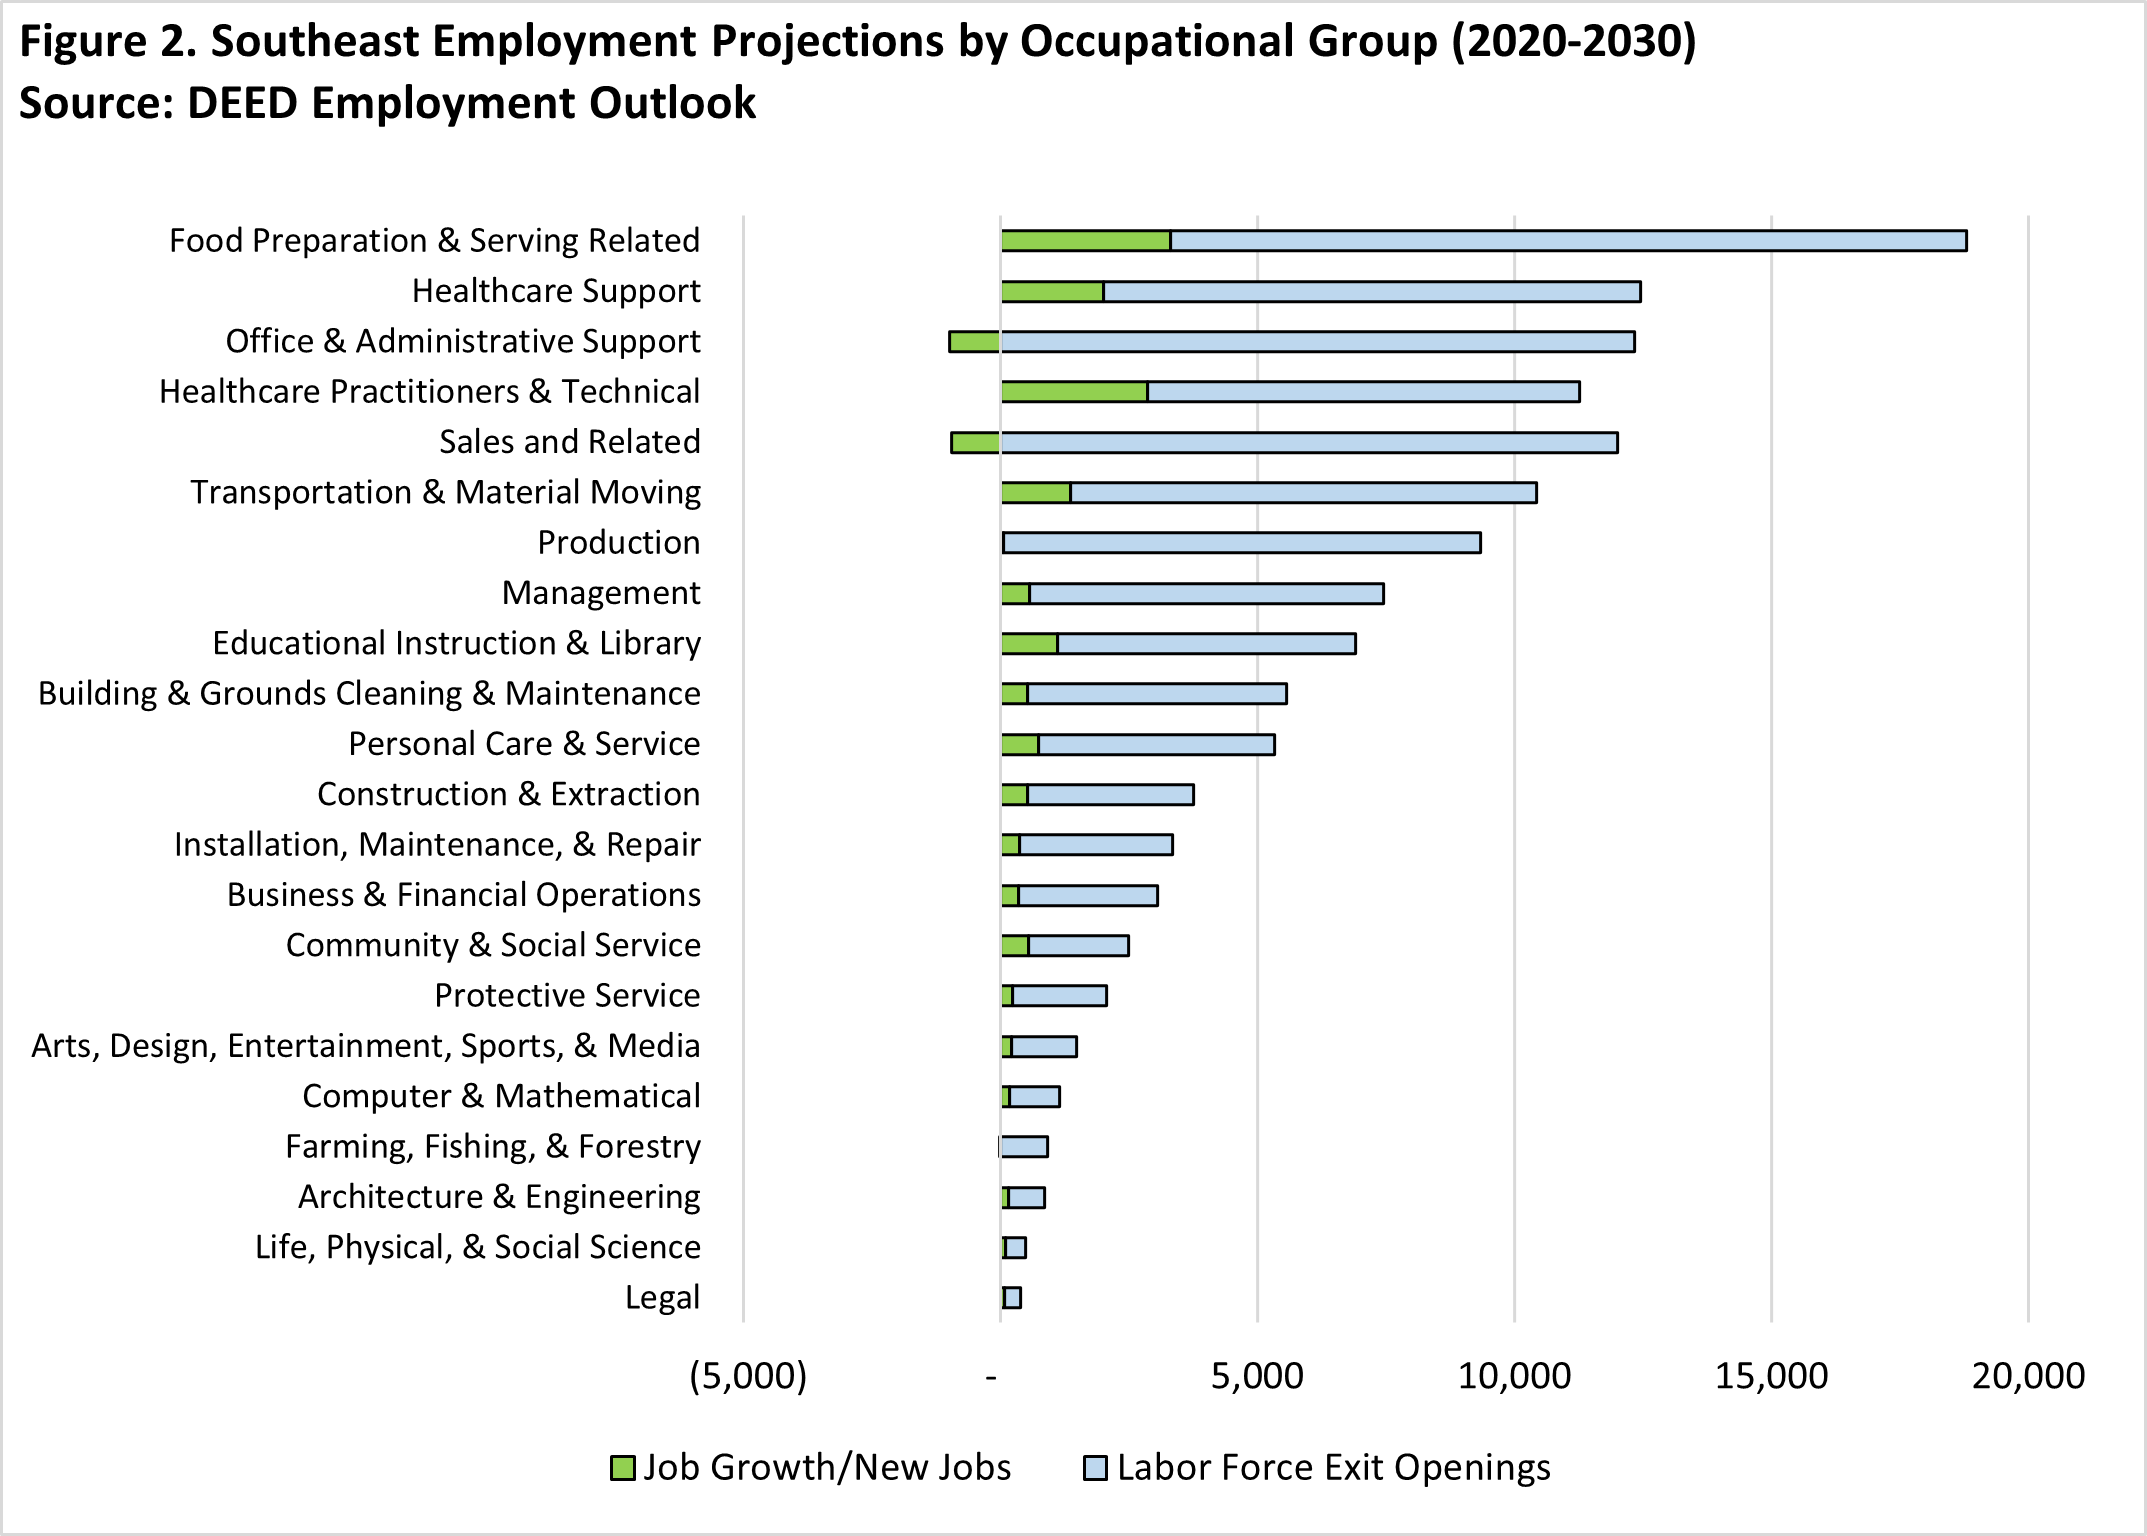 Southeast Employment Projections by Occupational Group